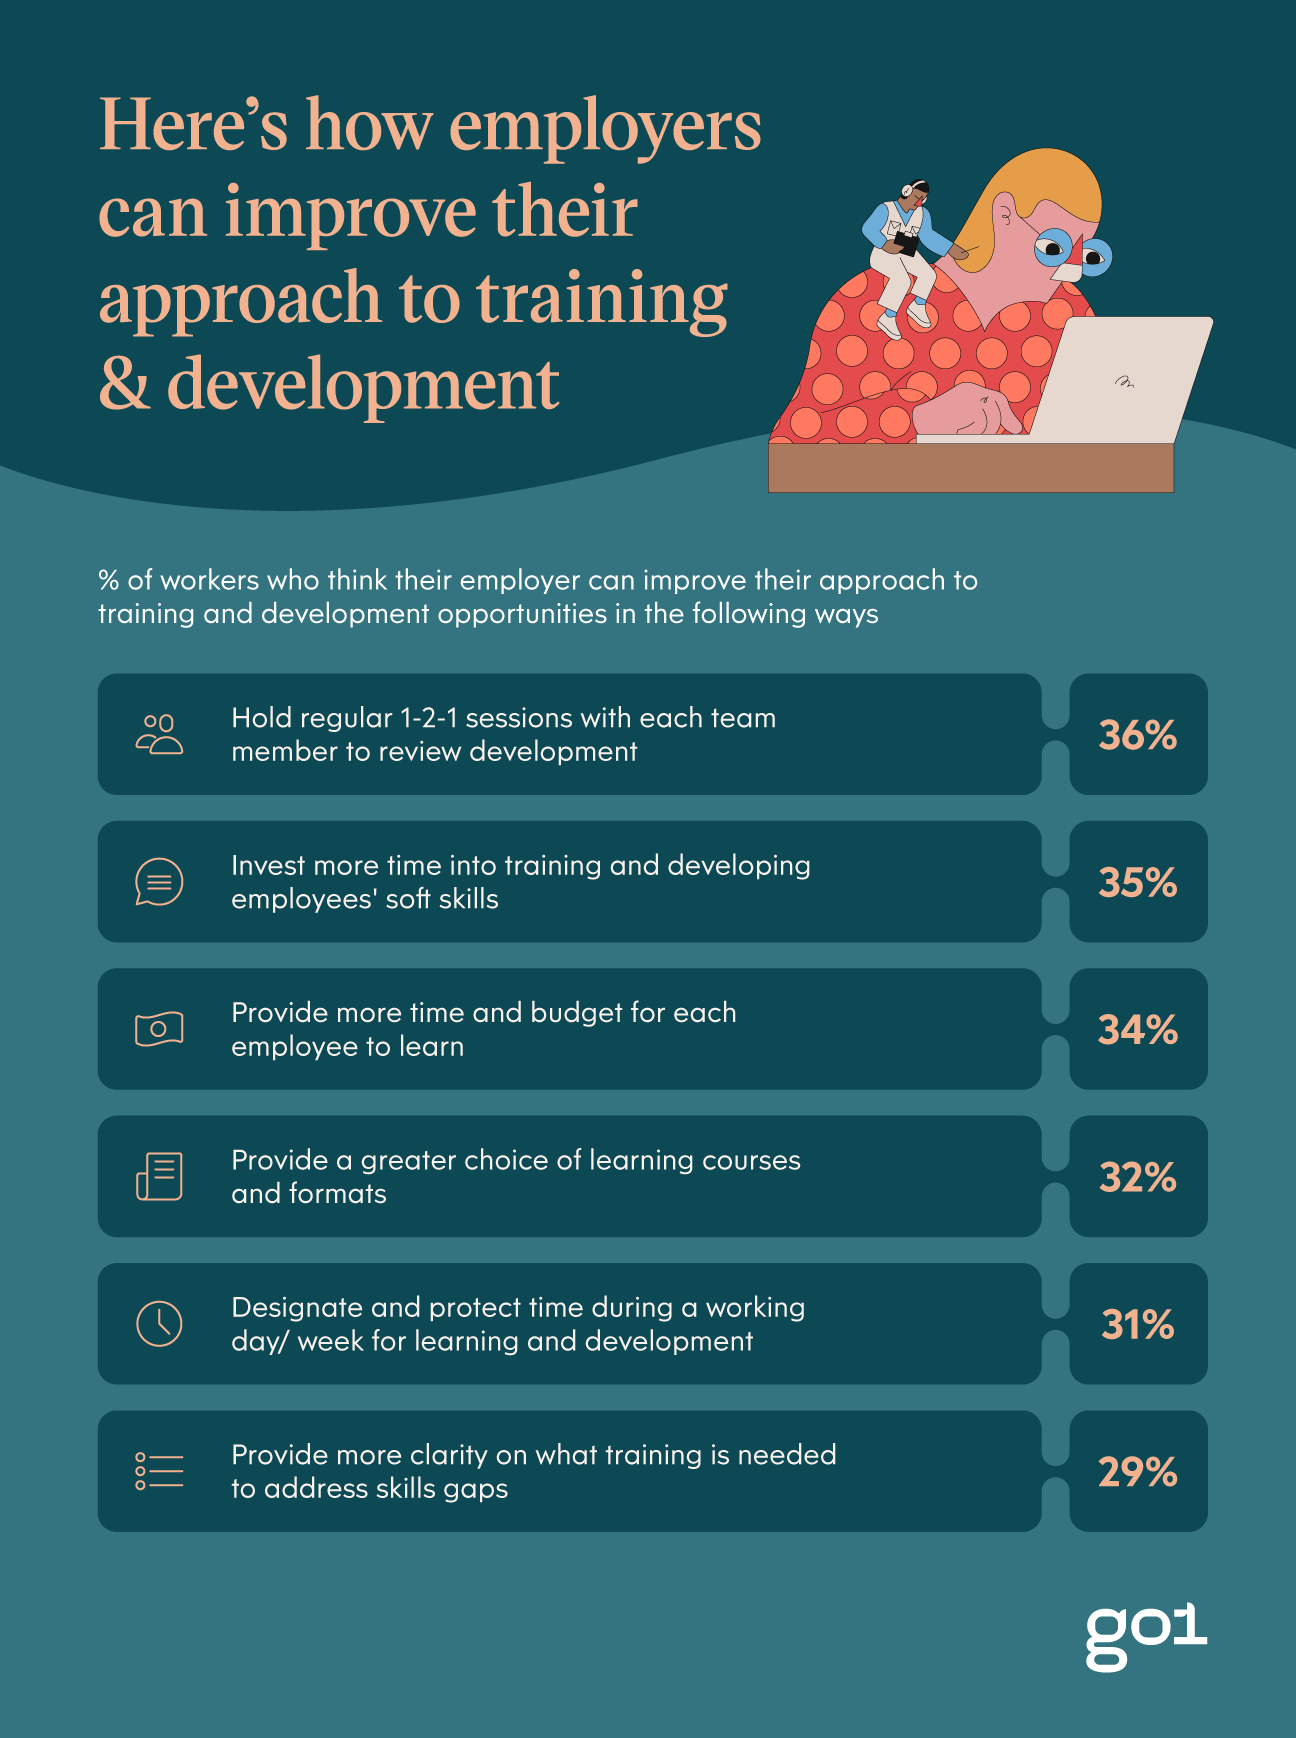 An image displaying 6 ways in which employers can better their training methods